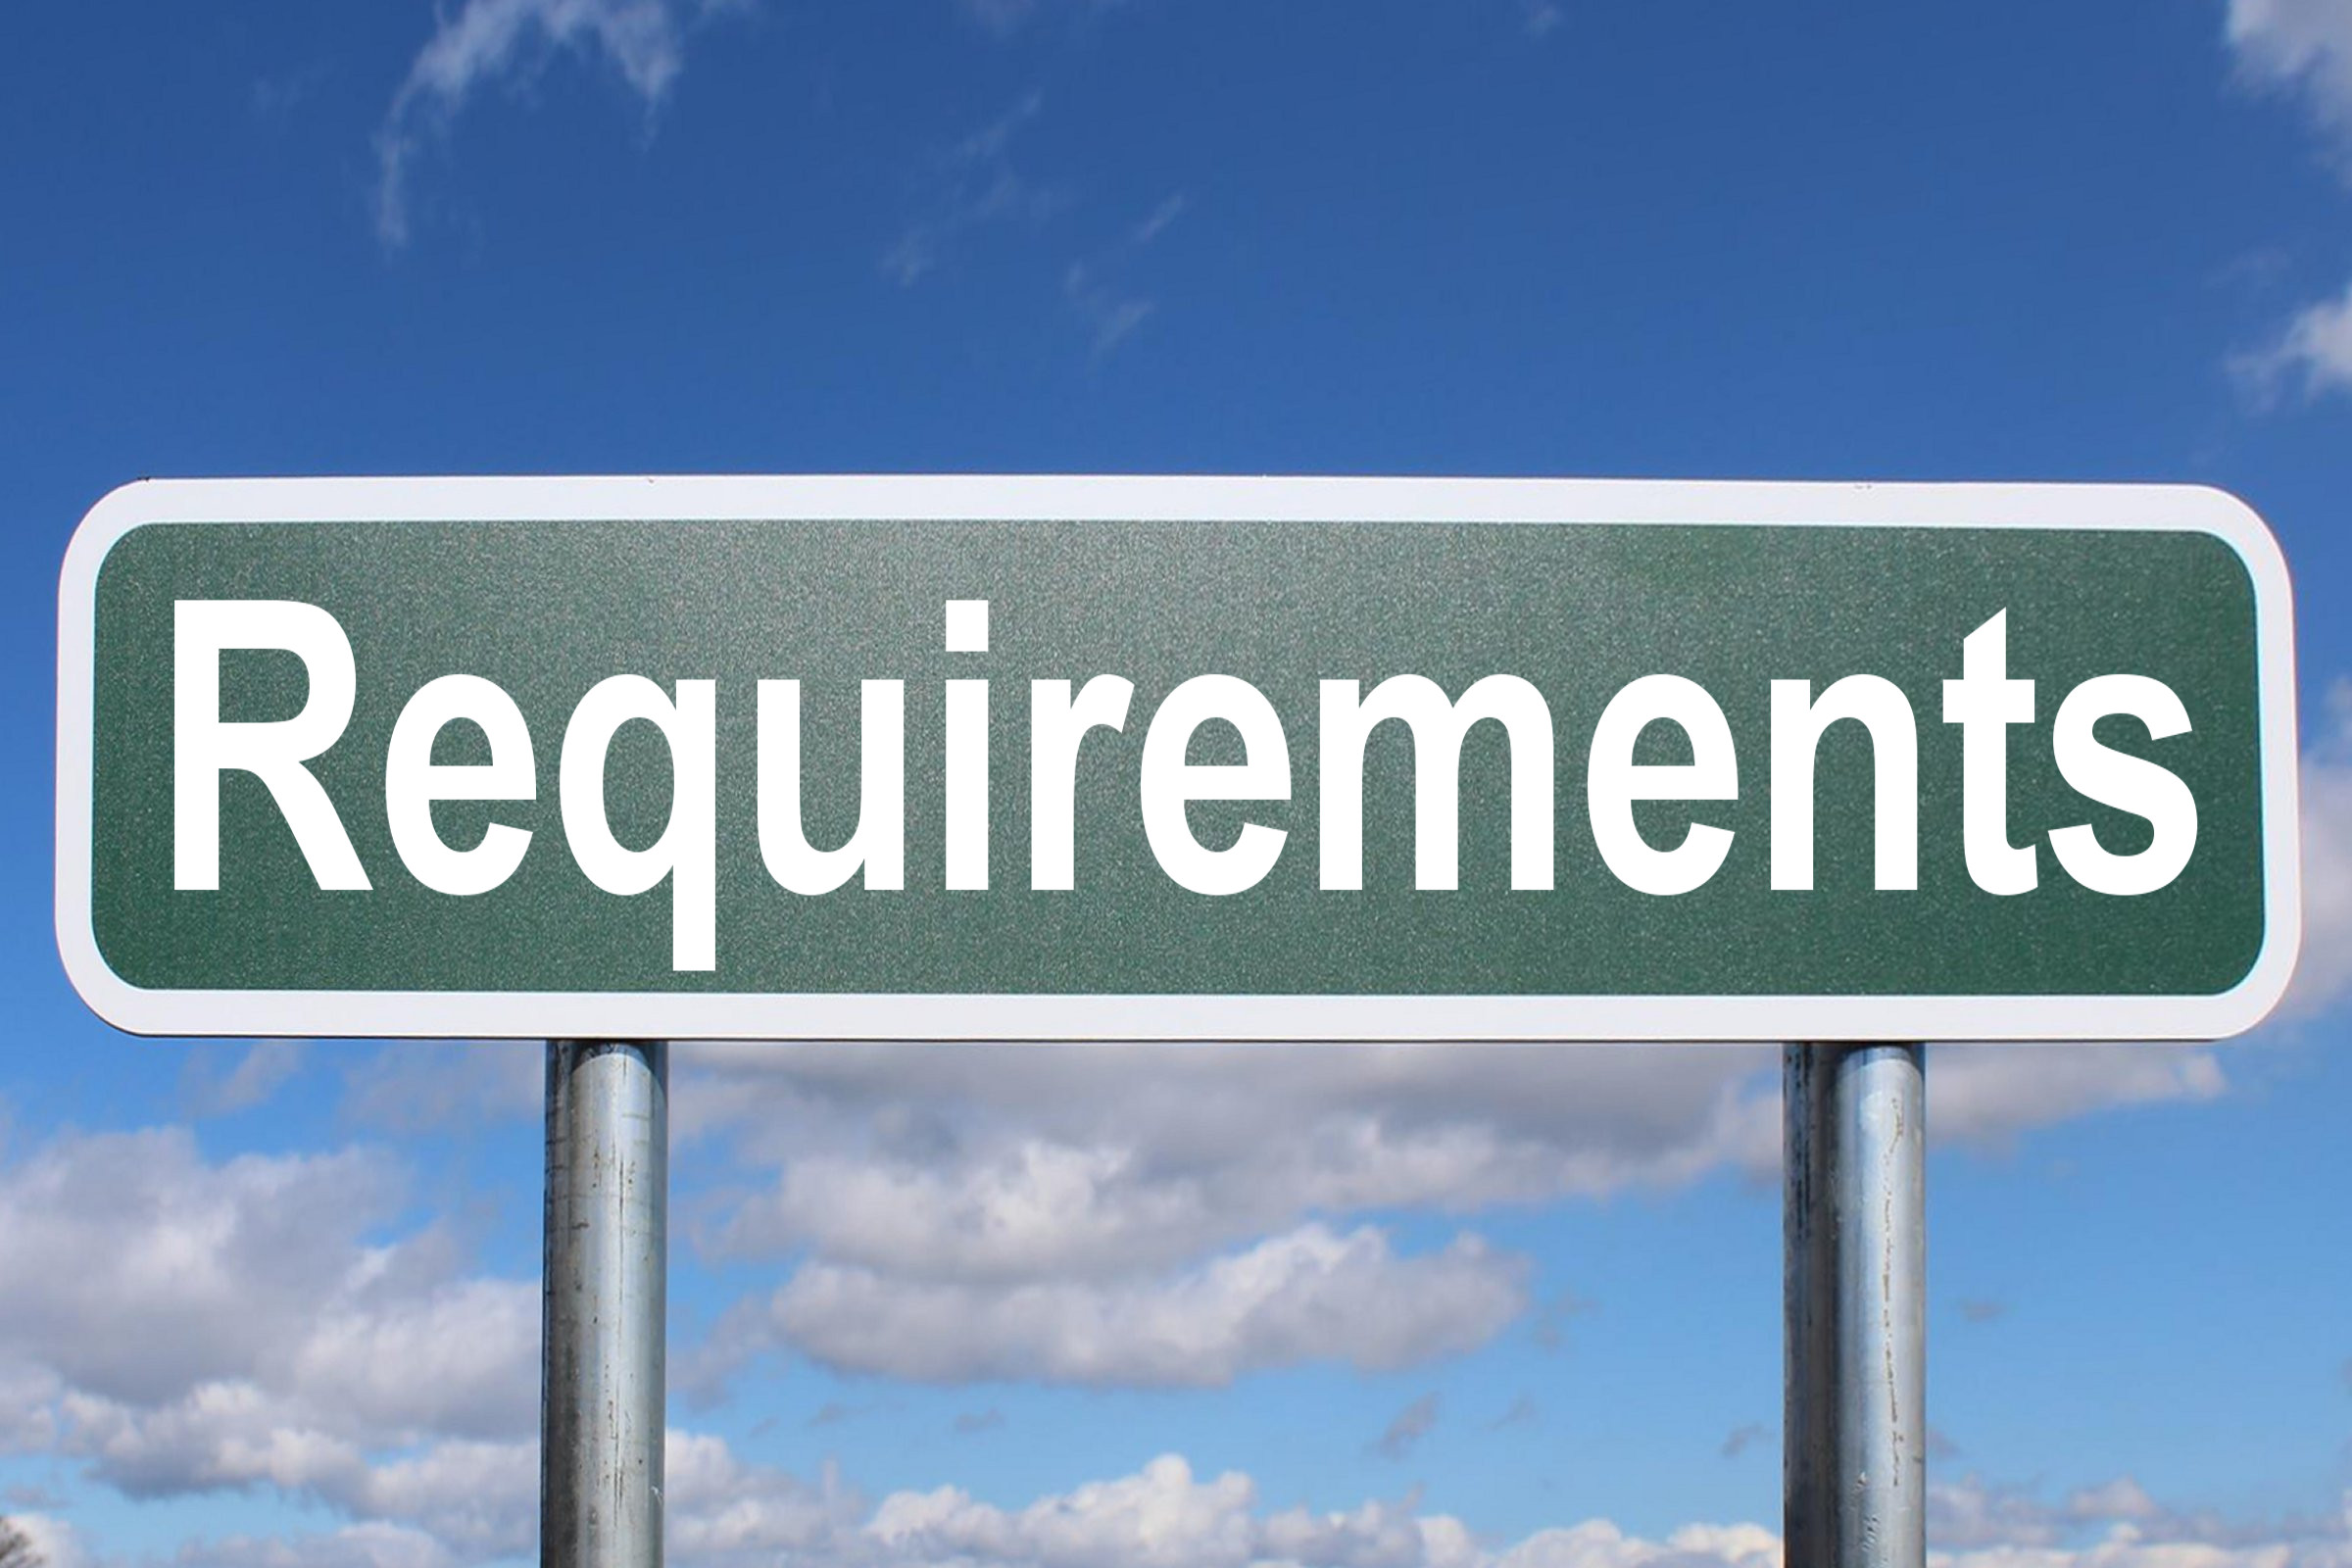 Requirements - Free of Charge Creative Commons Highway sign image